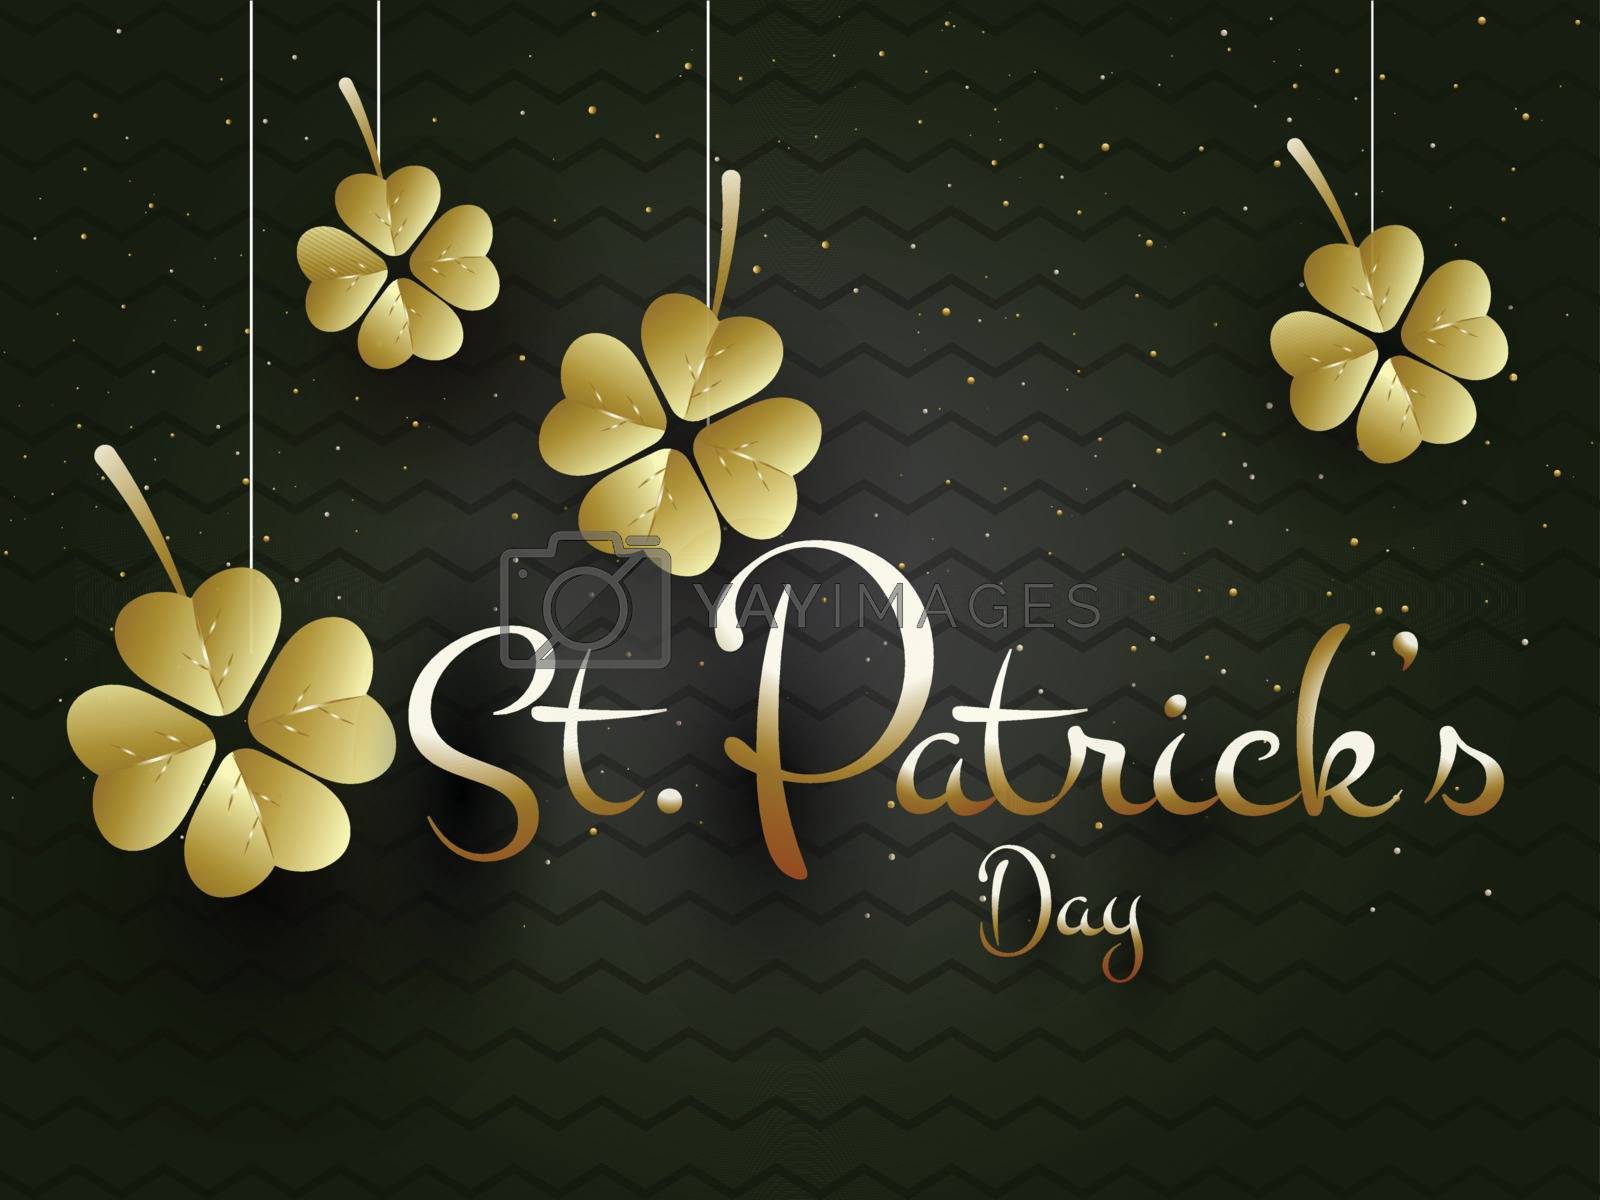 Royalty free image of Stylish calligraphy of St. Patrick's Day on black background dec by aispl